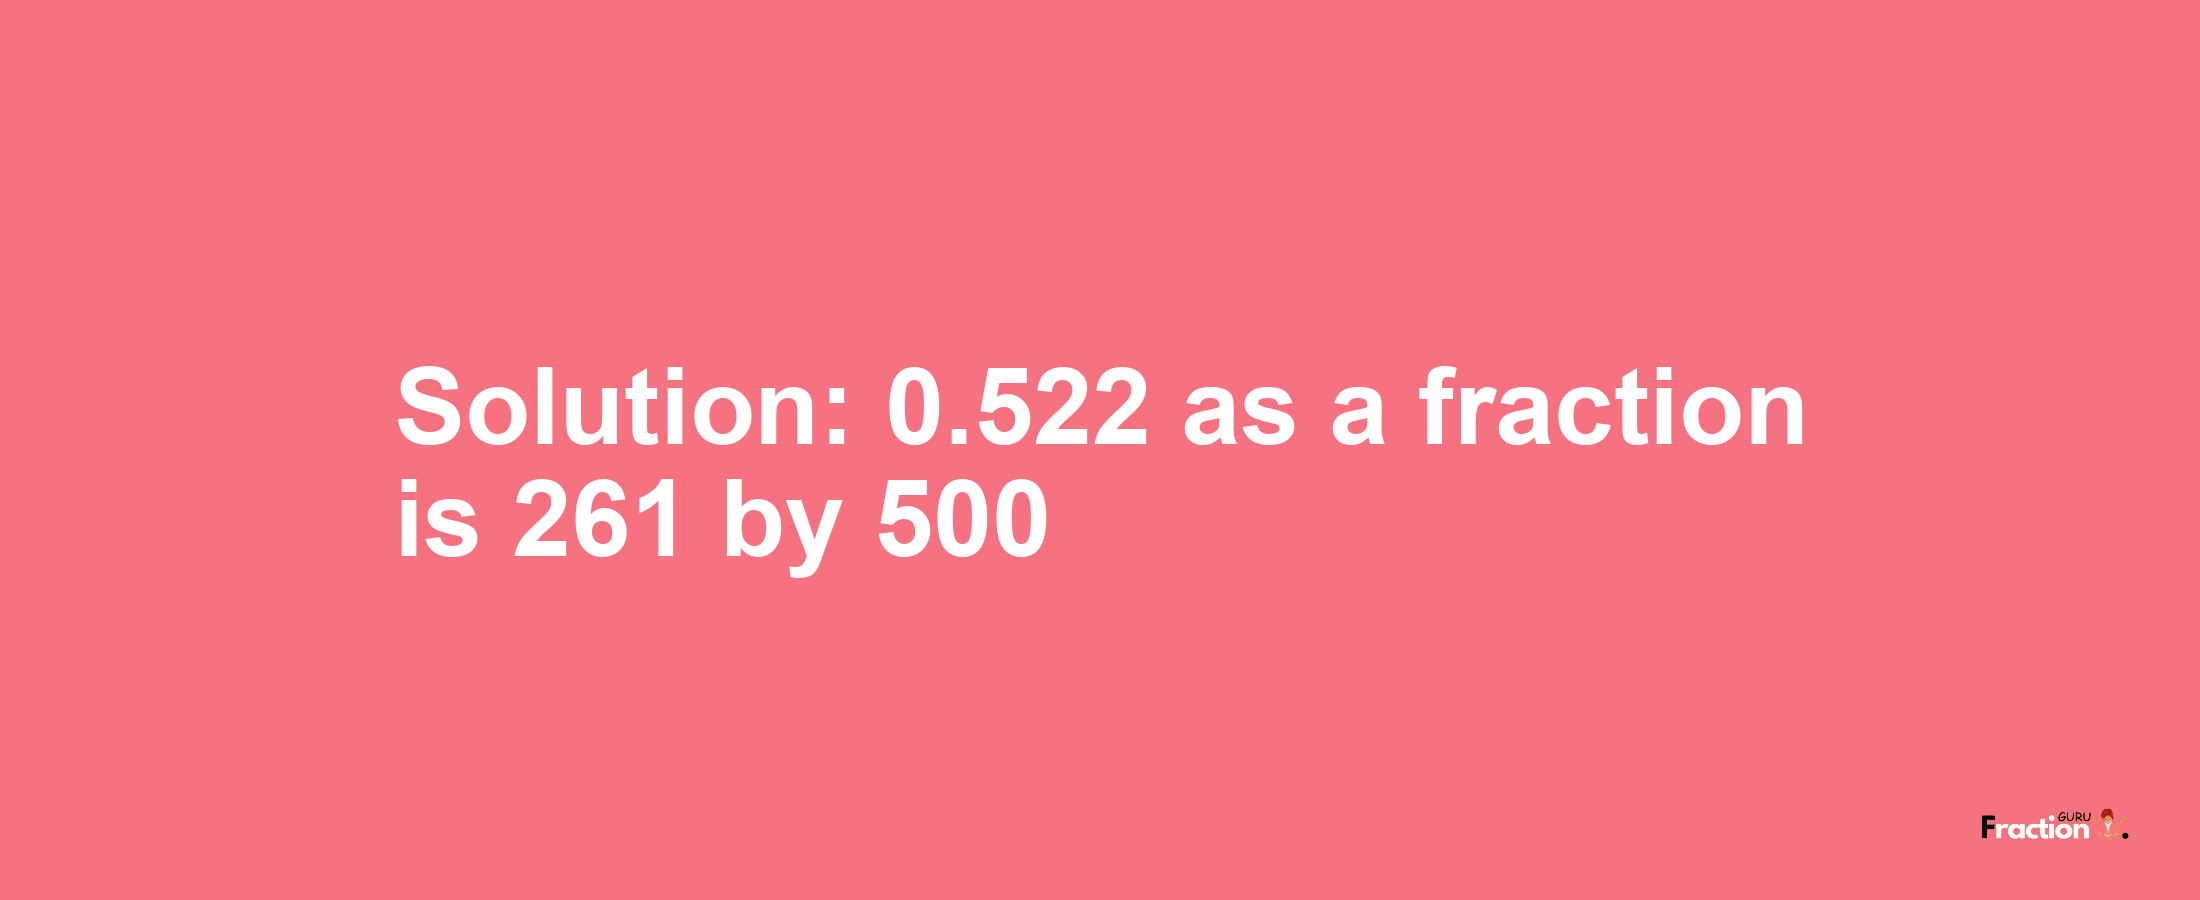 Solution:0.522 as a fraction is 261/500